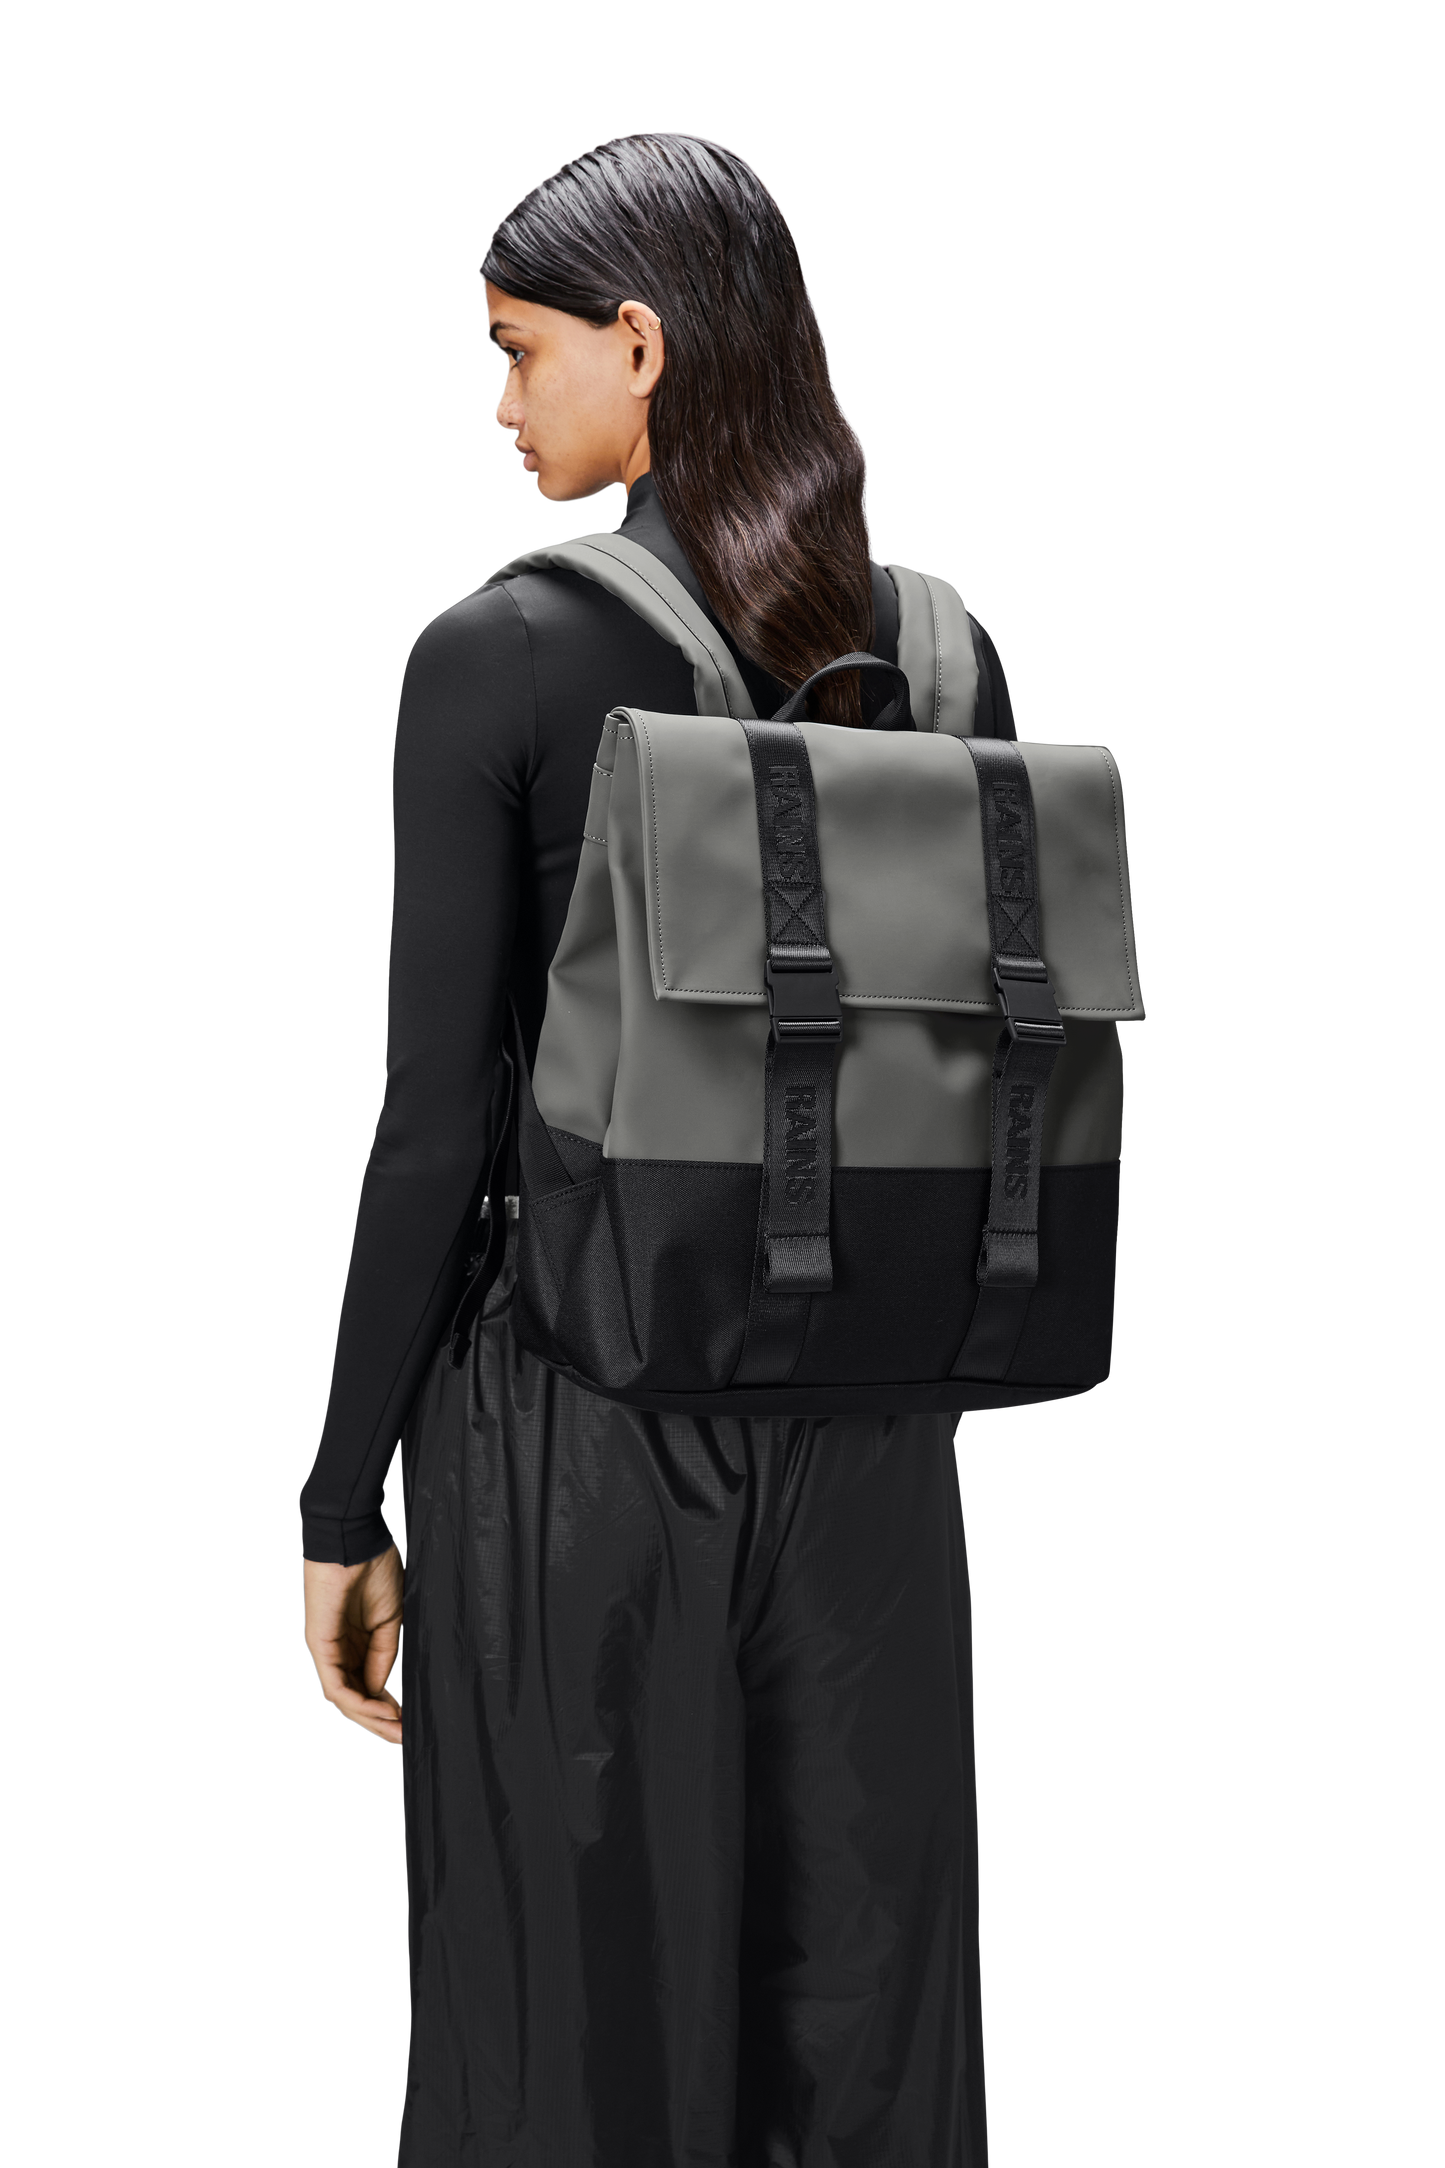 A person wearing black clothes and a square shaped Rains backpack.